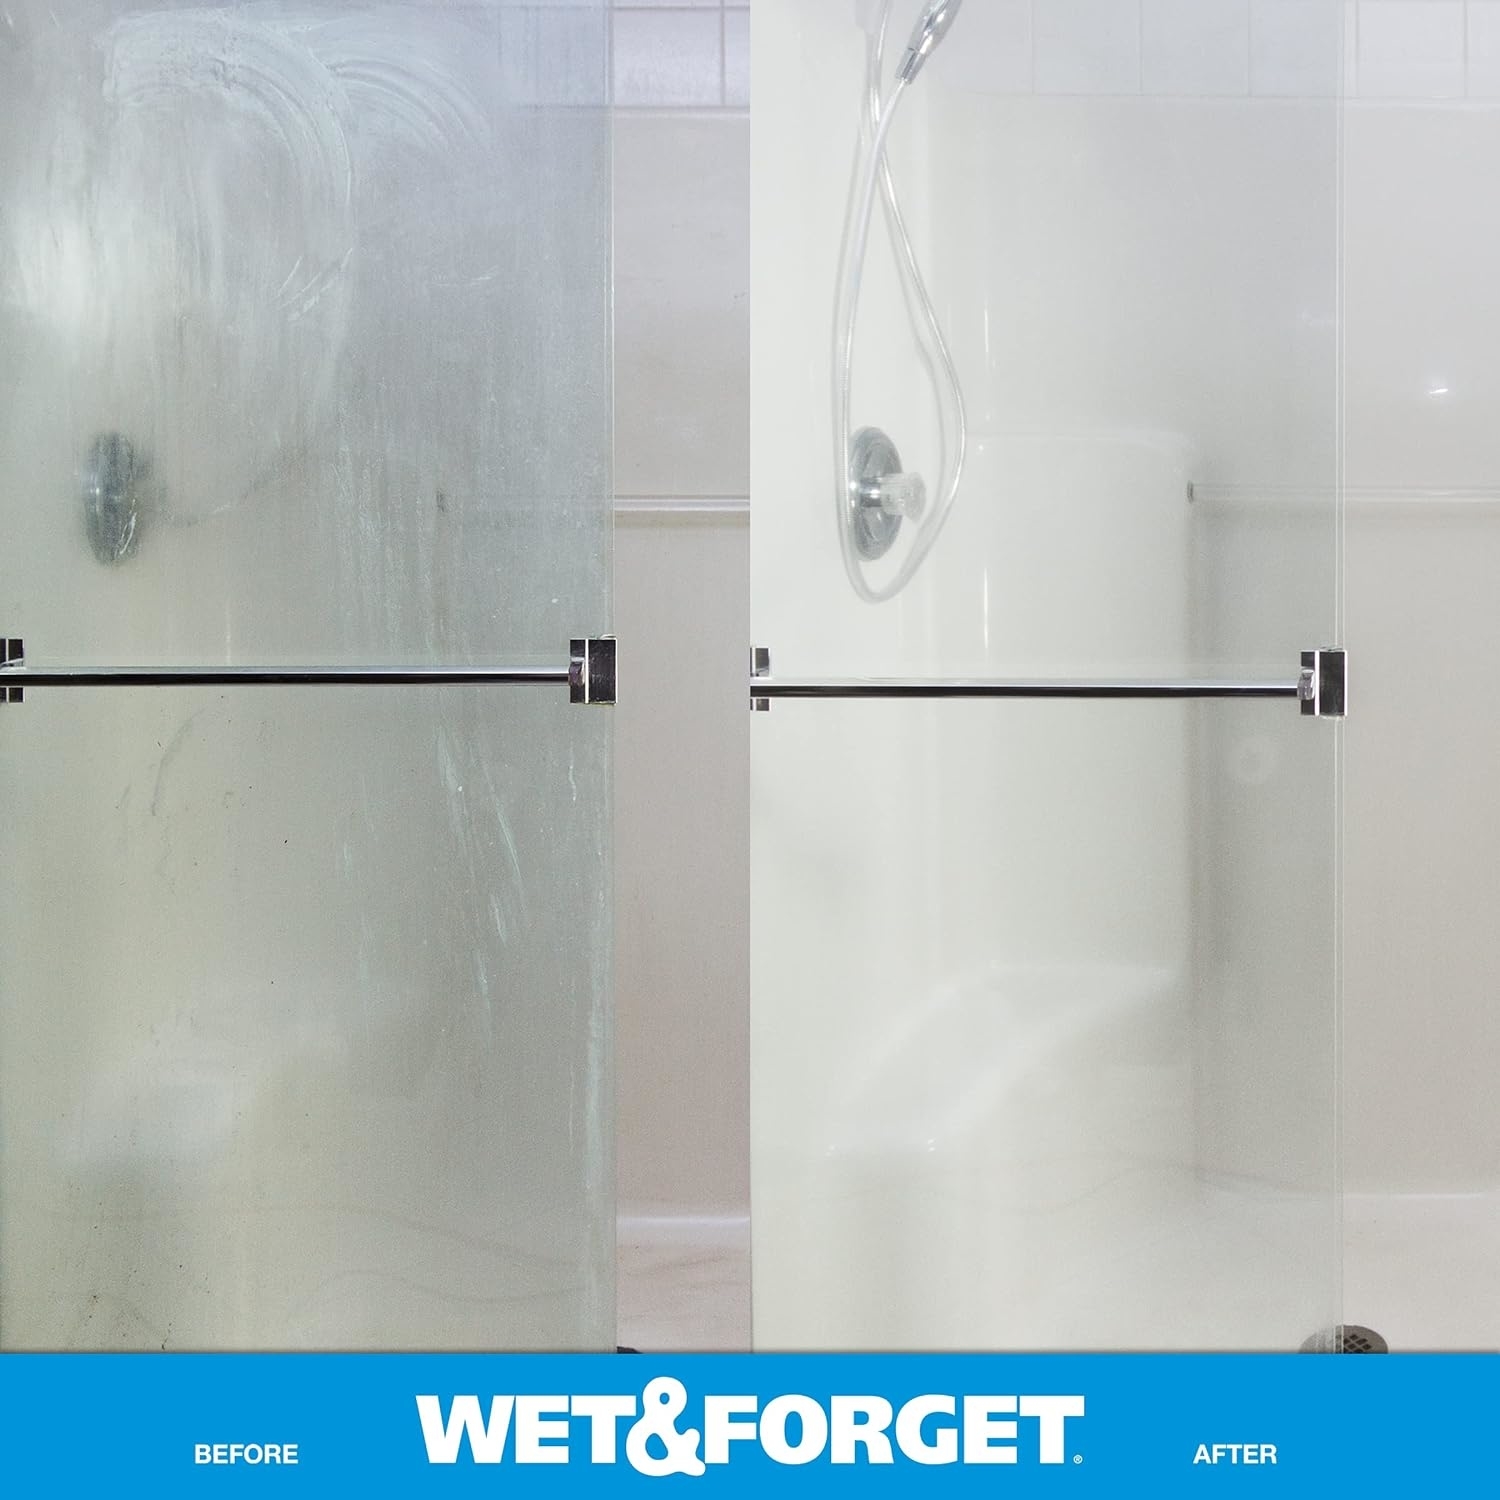 on the left, a cloudy shower door labeled &quot;before&quot; and the same shower door looking clear labeled &quot;after&quot;